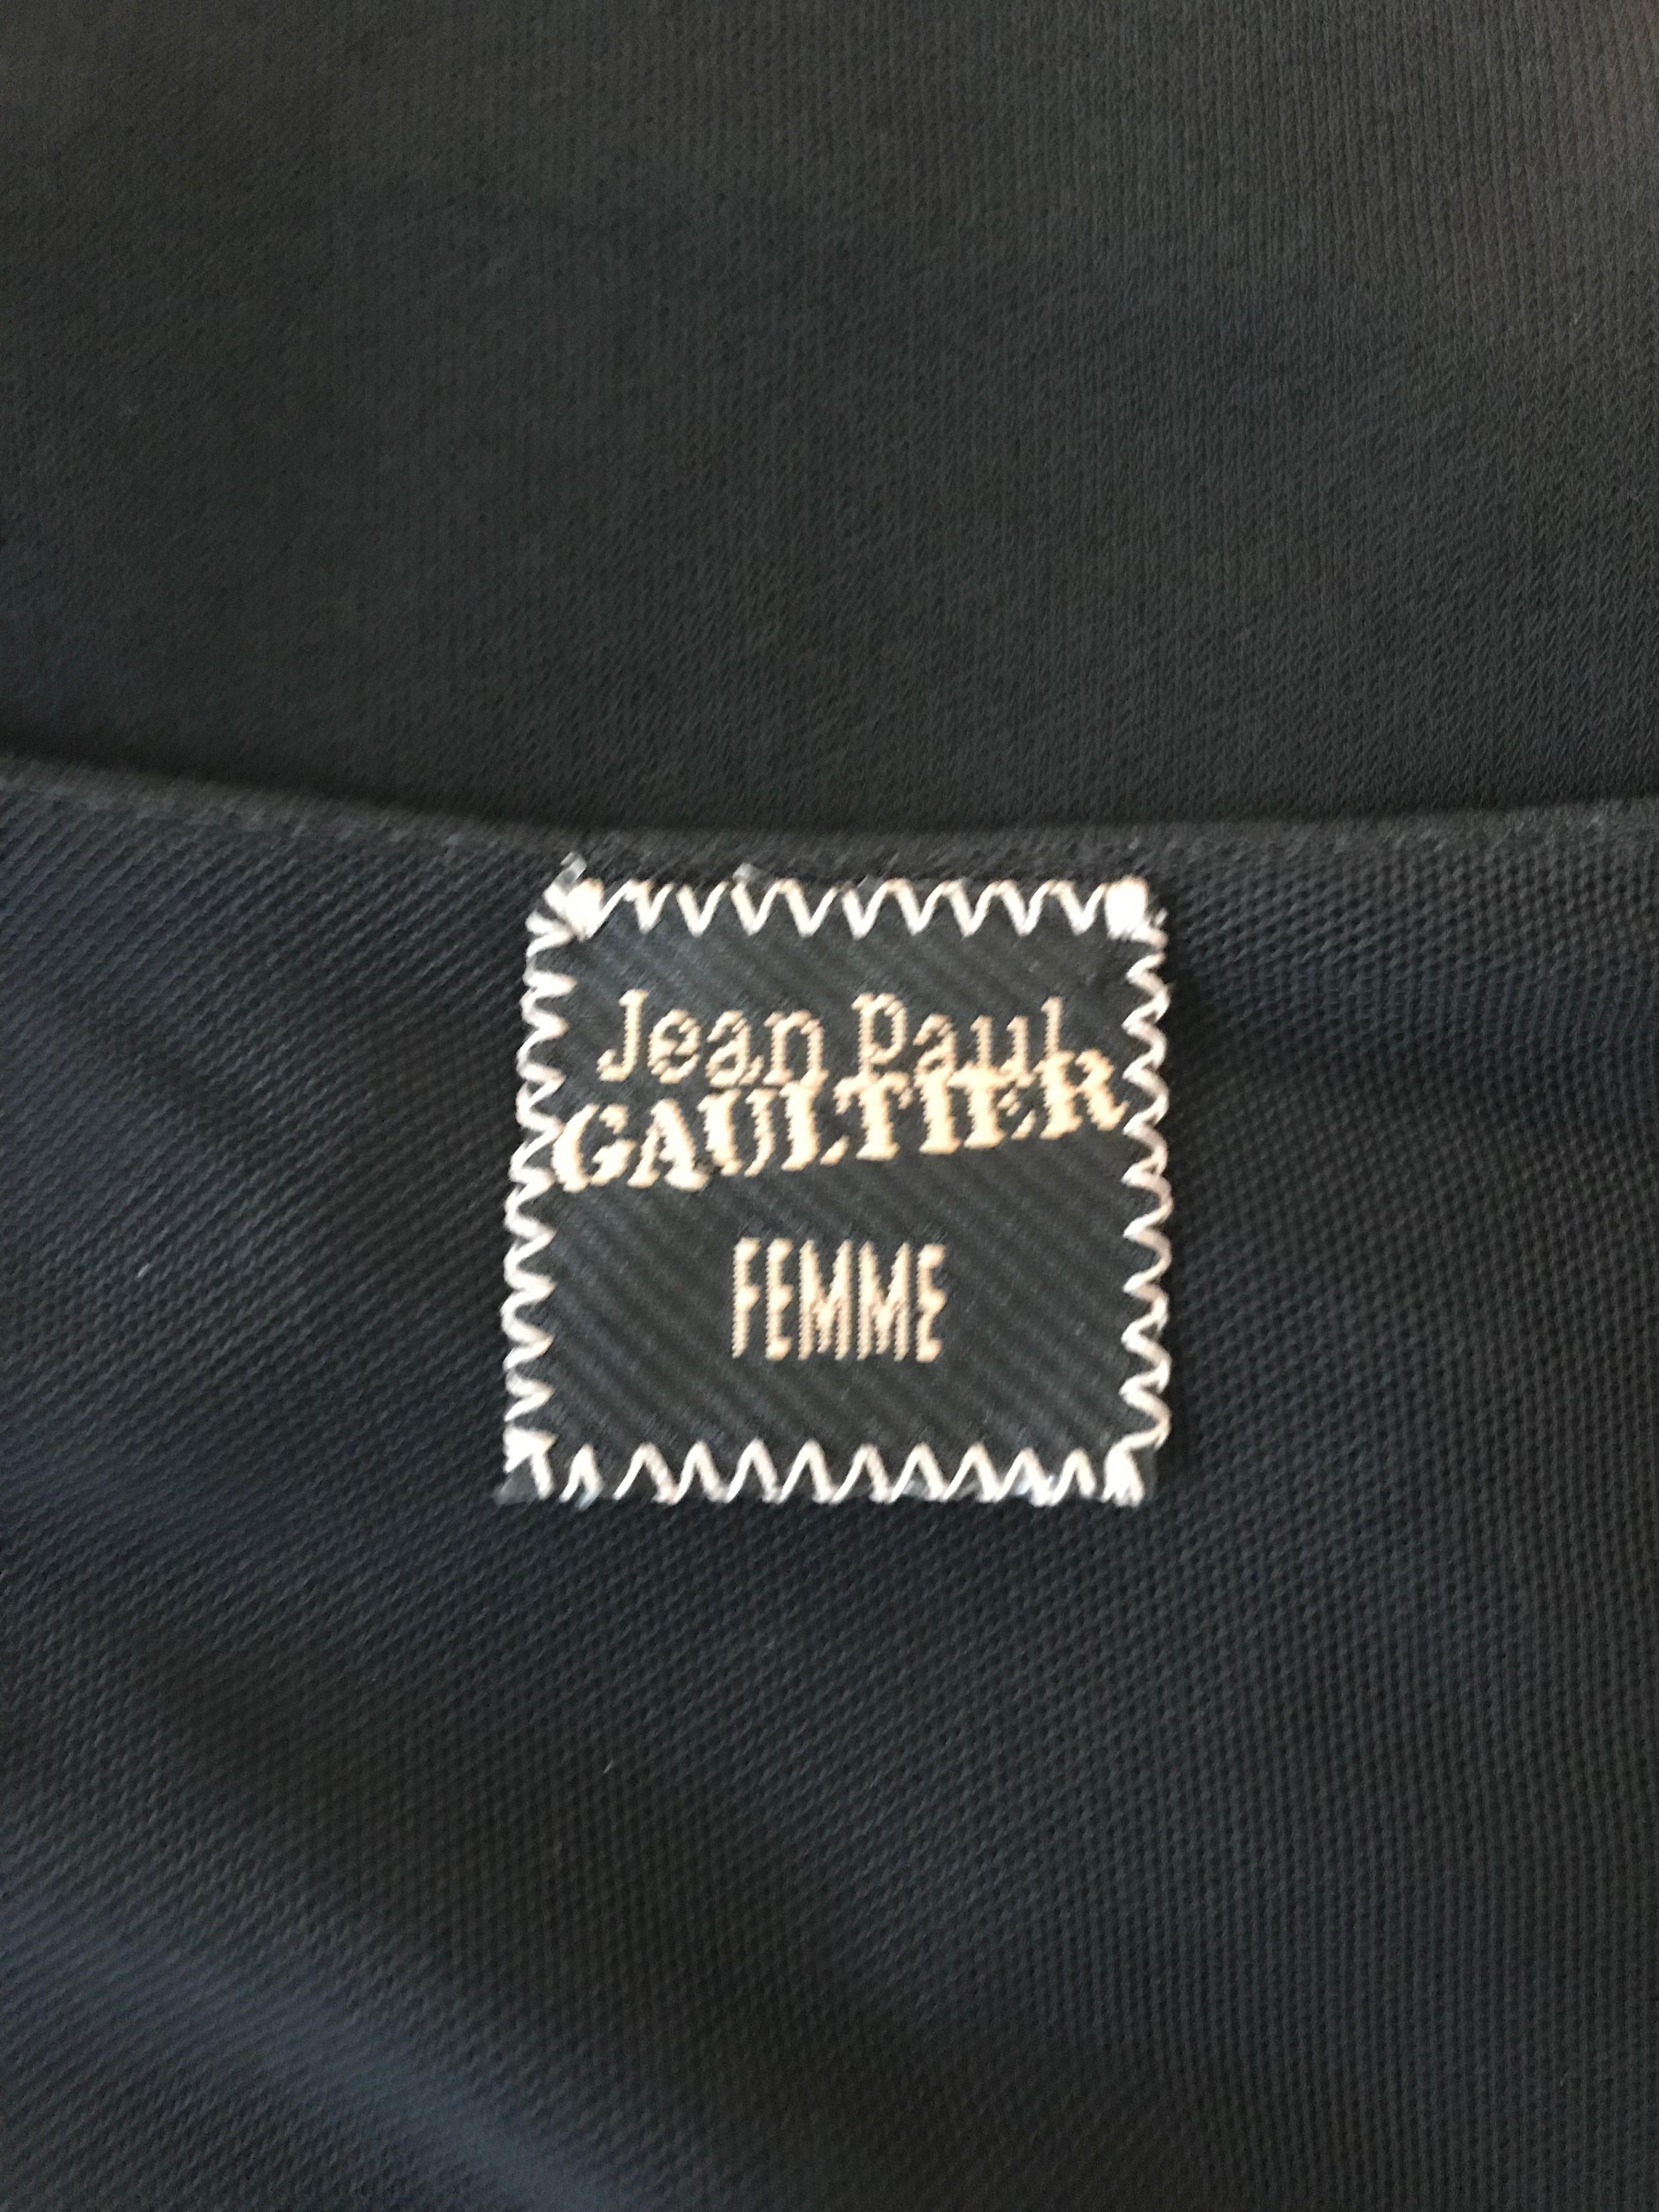 Jean Paul Gaultier Snap Detail Little Black Jersey Dress In Excellent Condition For Sale In San Francisco, CA